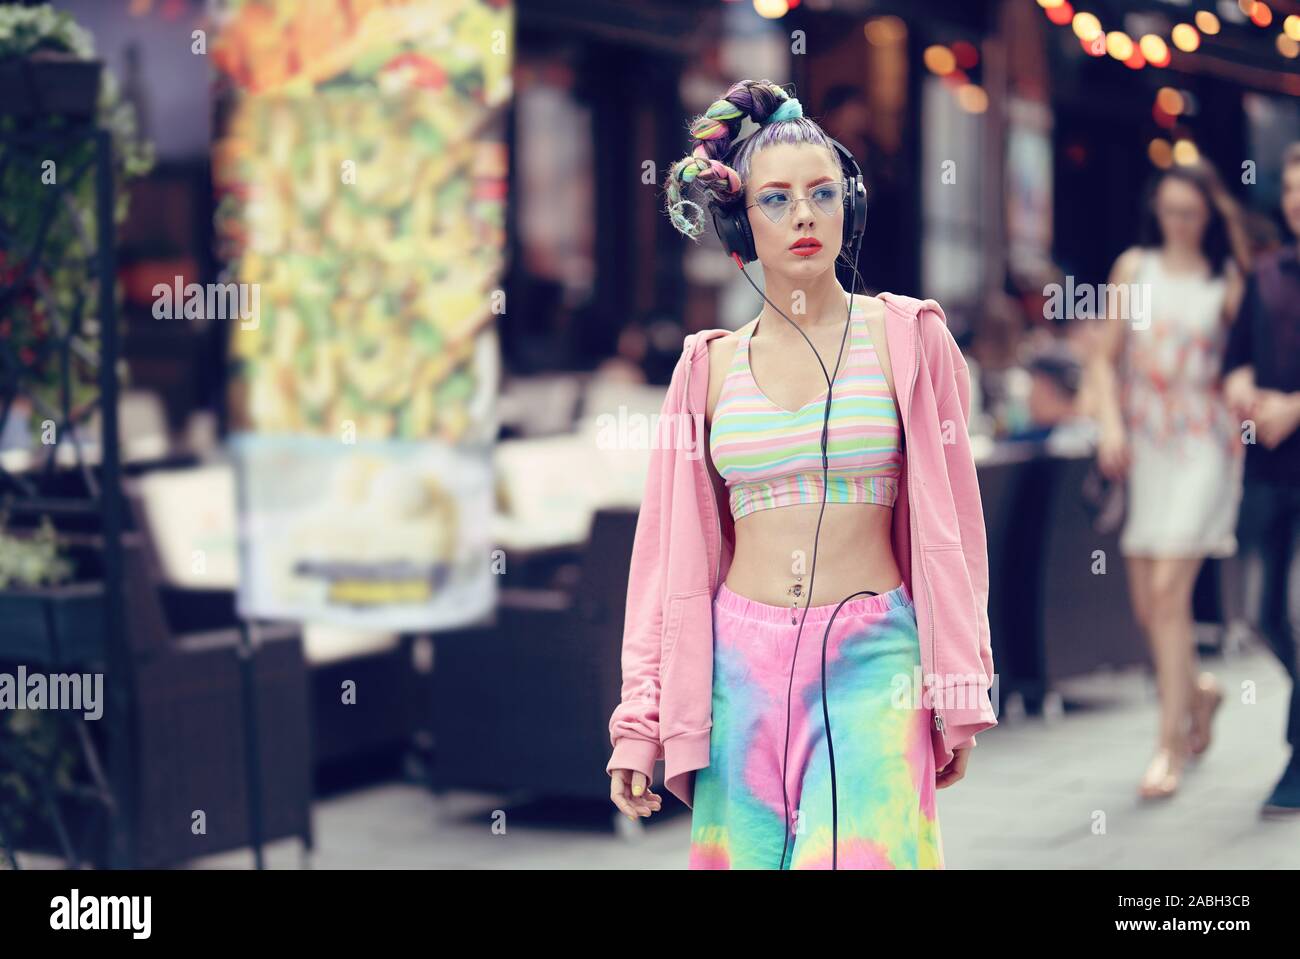 Modern fashion vanguard woman on the streets with trendy eyeglasses and piercings, listening music on headphones - Unique Avant-garde confident young Stock Photo